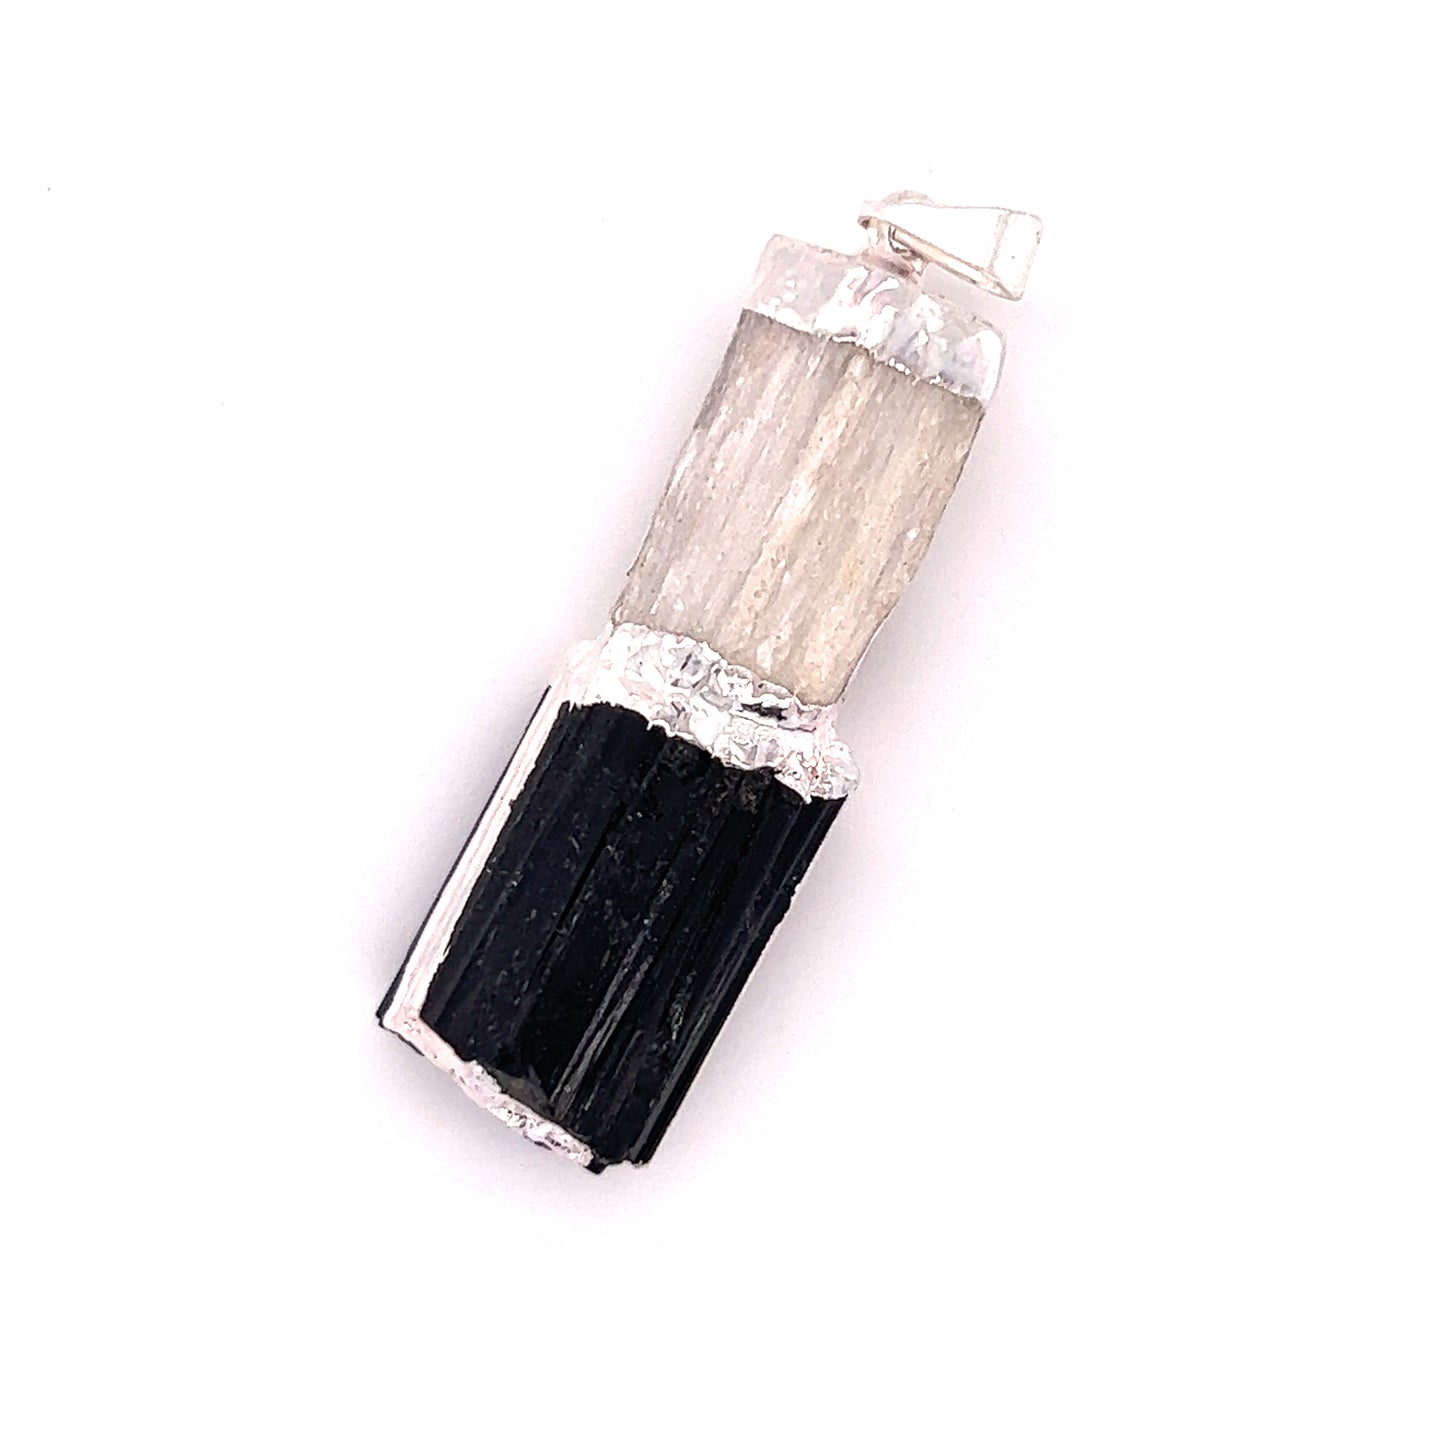 A Tourmaline and Selenite Pendant with black tourmaline stones by Super Silver.